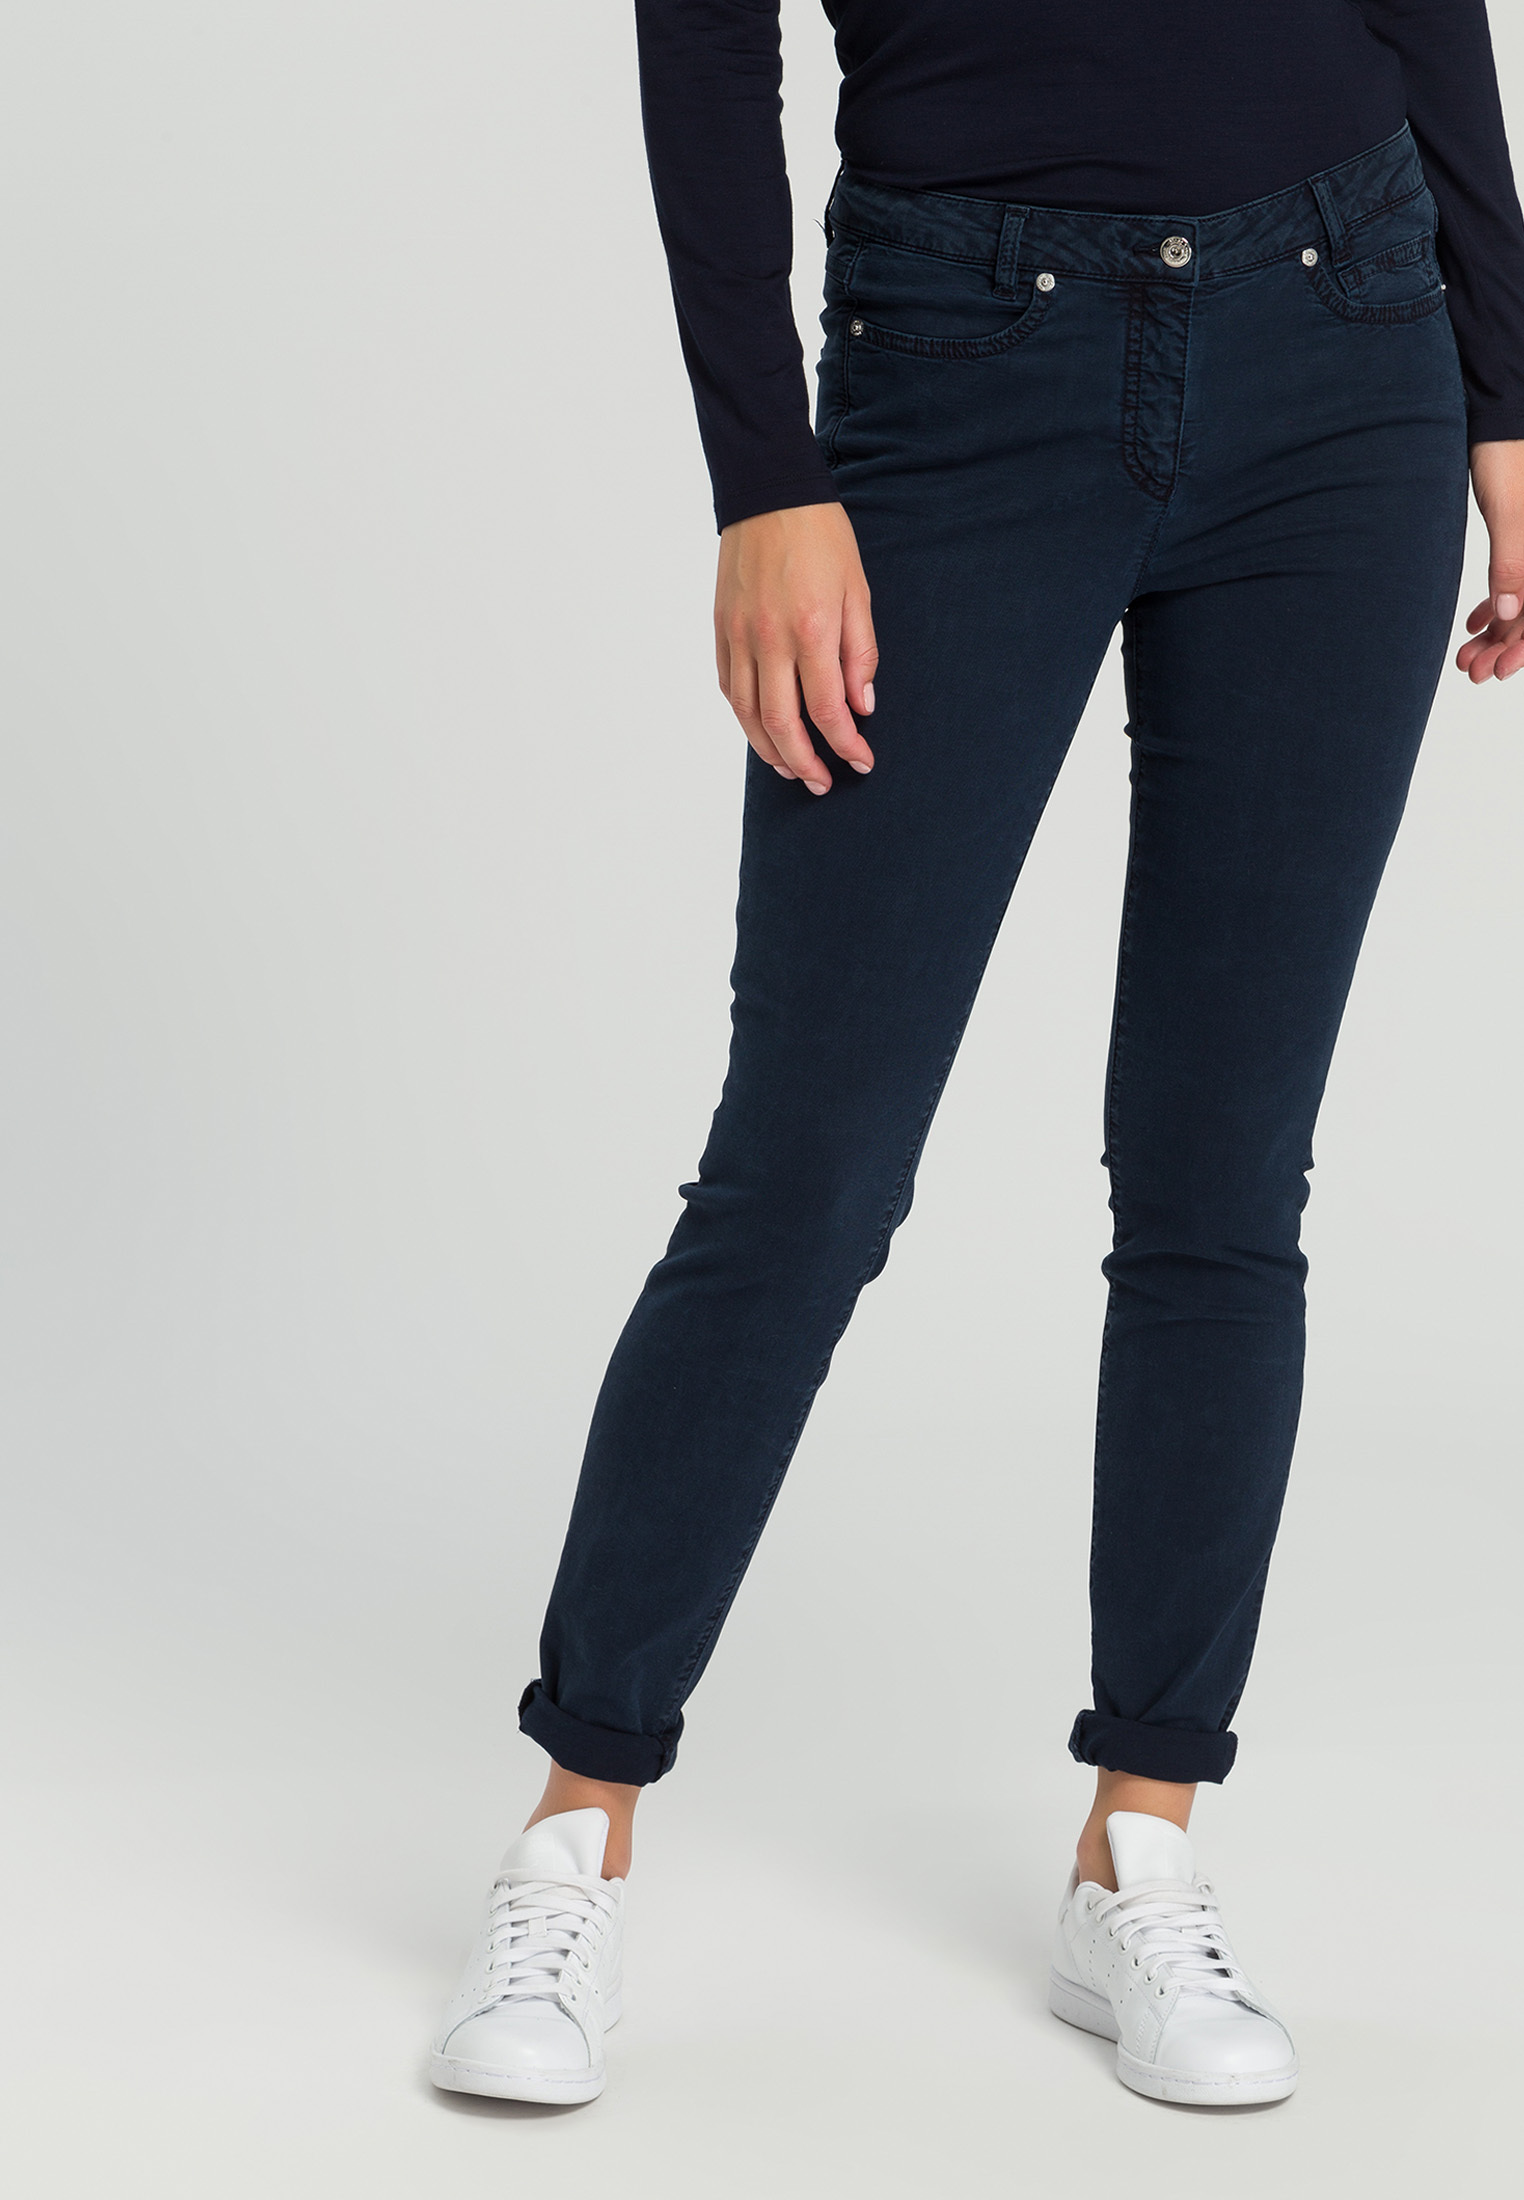 Skinny Pants Skinny fit | Trousers & Jeans | Fashion